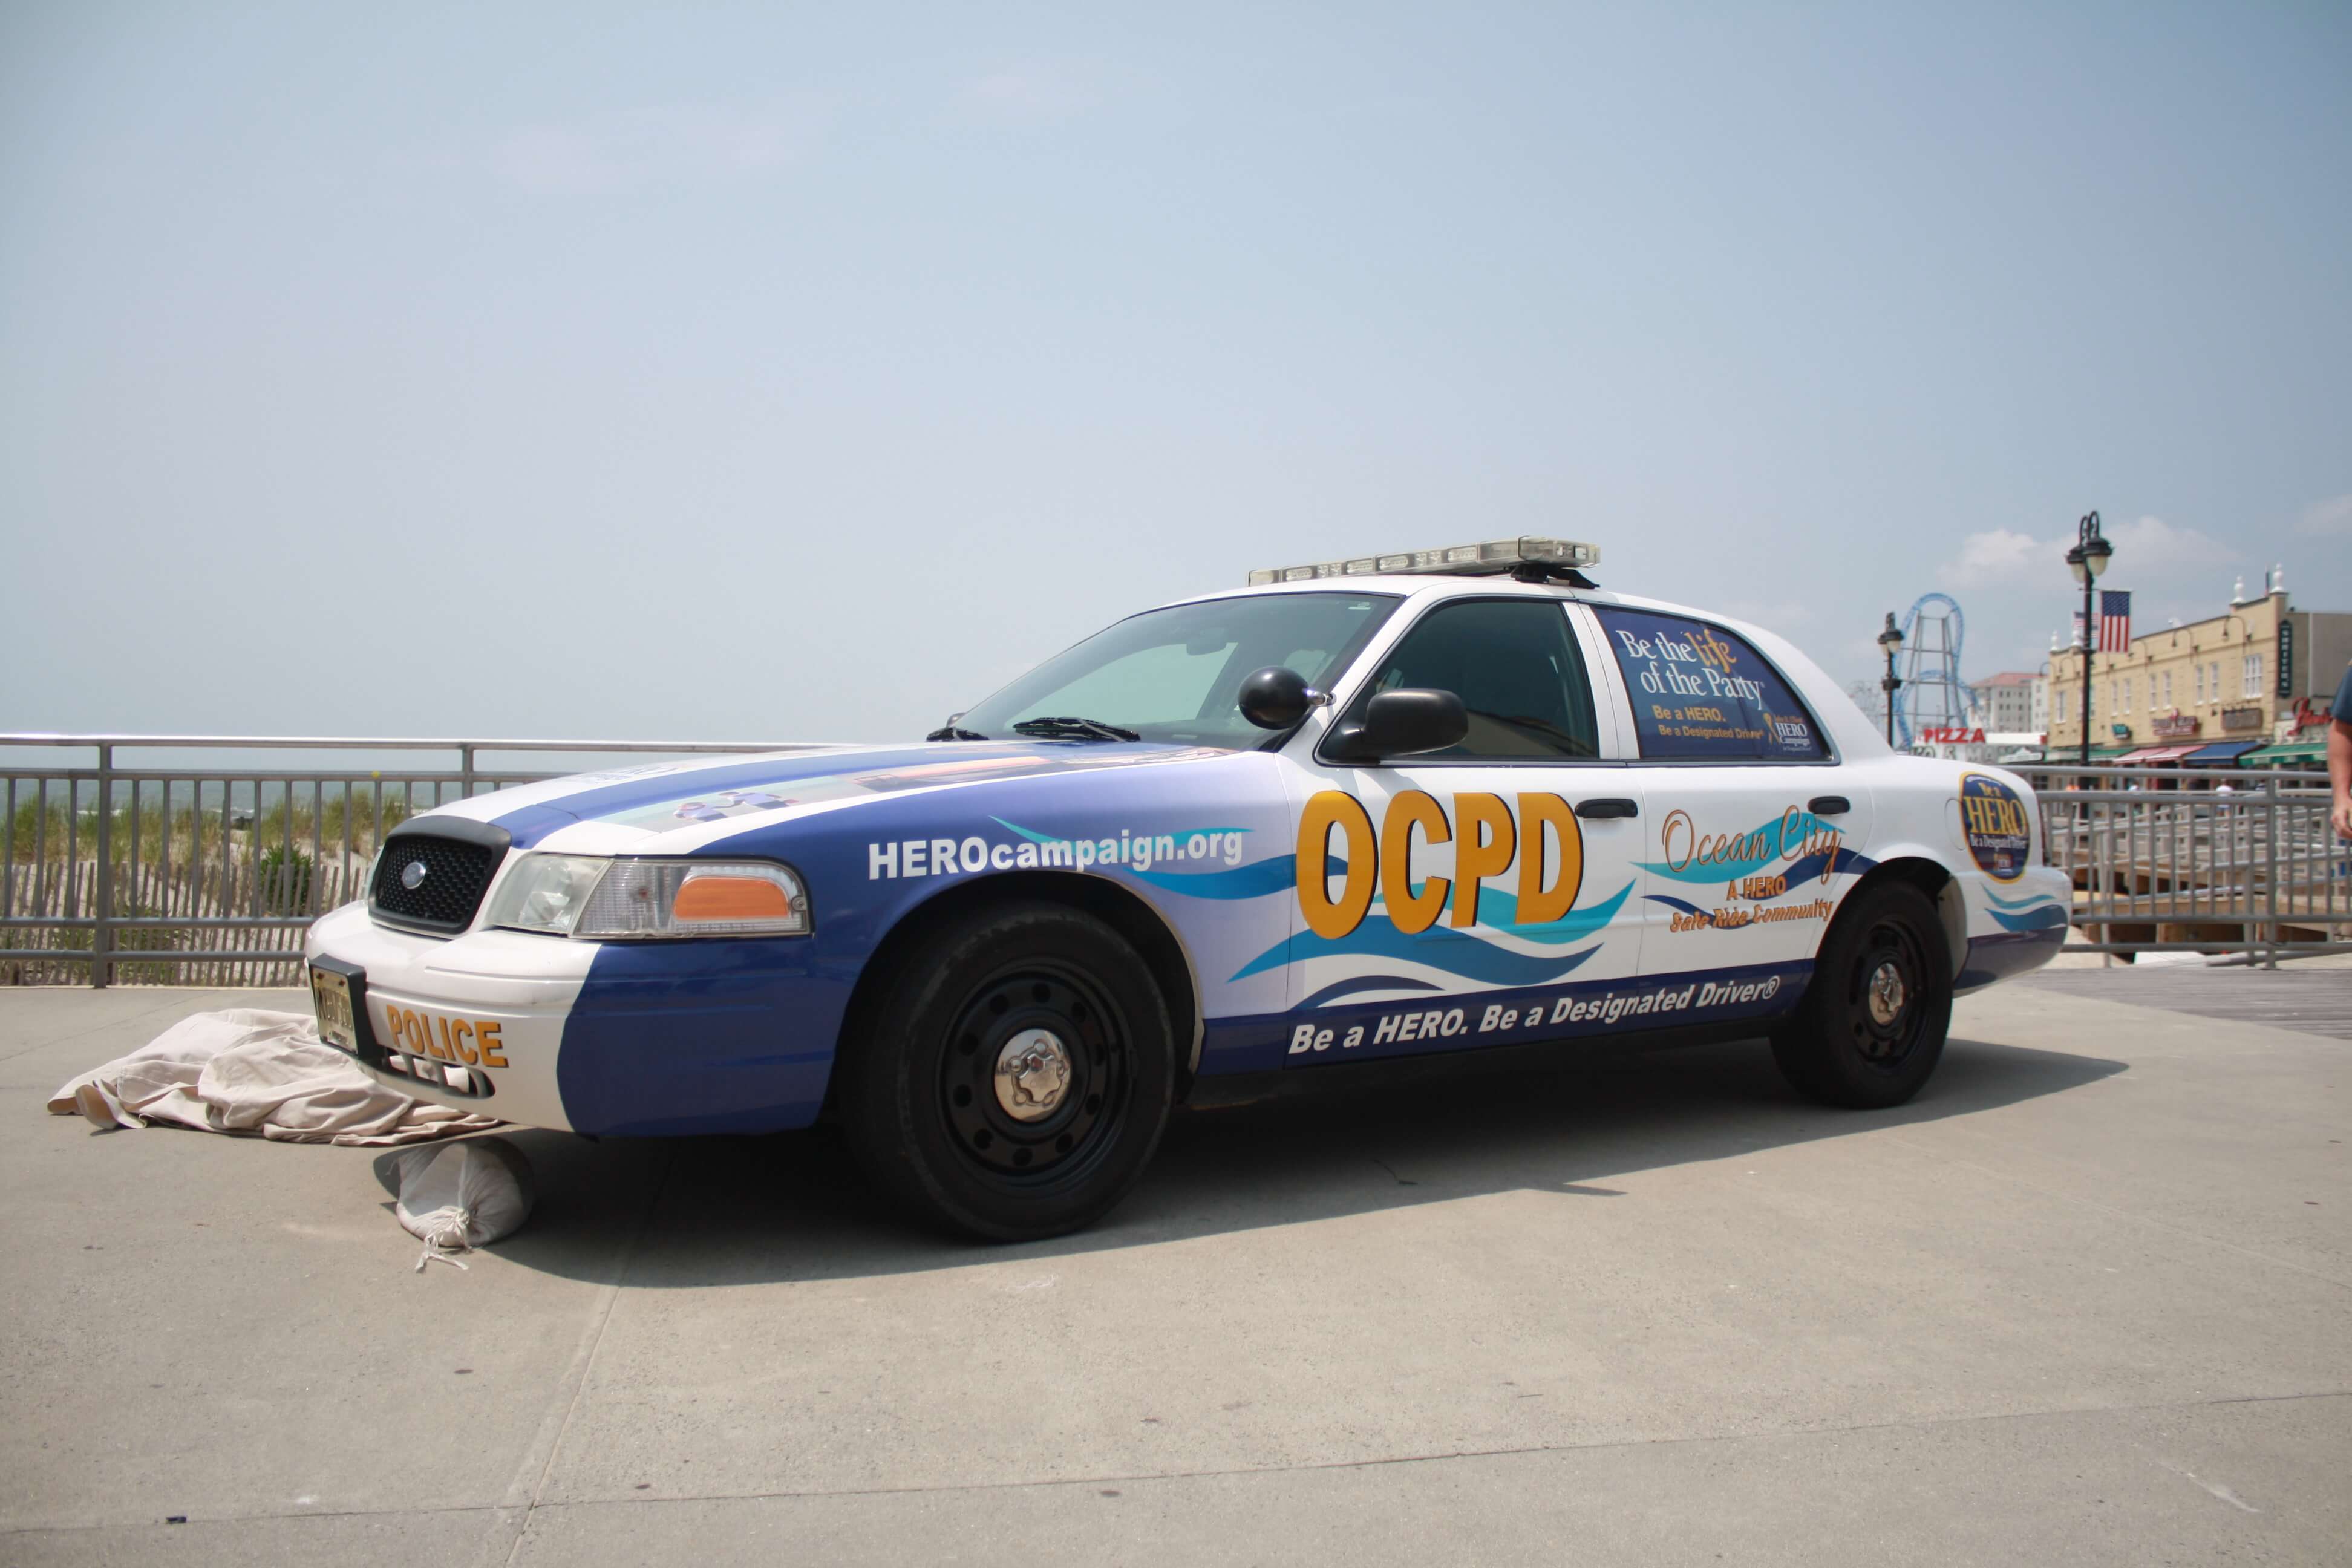 The HERO Campaign and the Ocean Police Department unveiled a HERO Campaign-themed police cruiser to promote safe and sober designated driving.